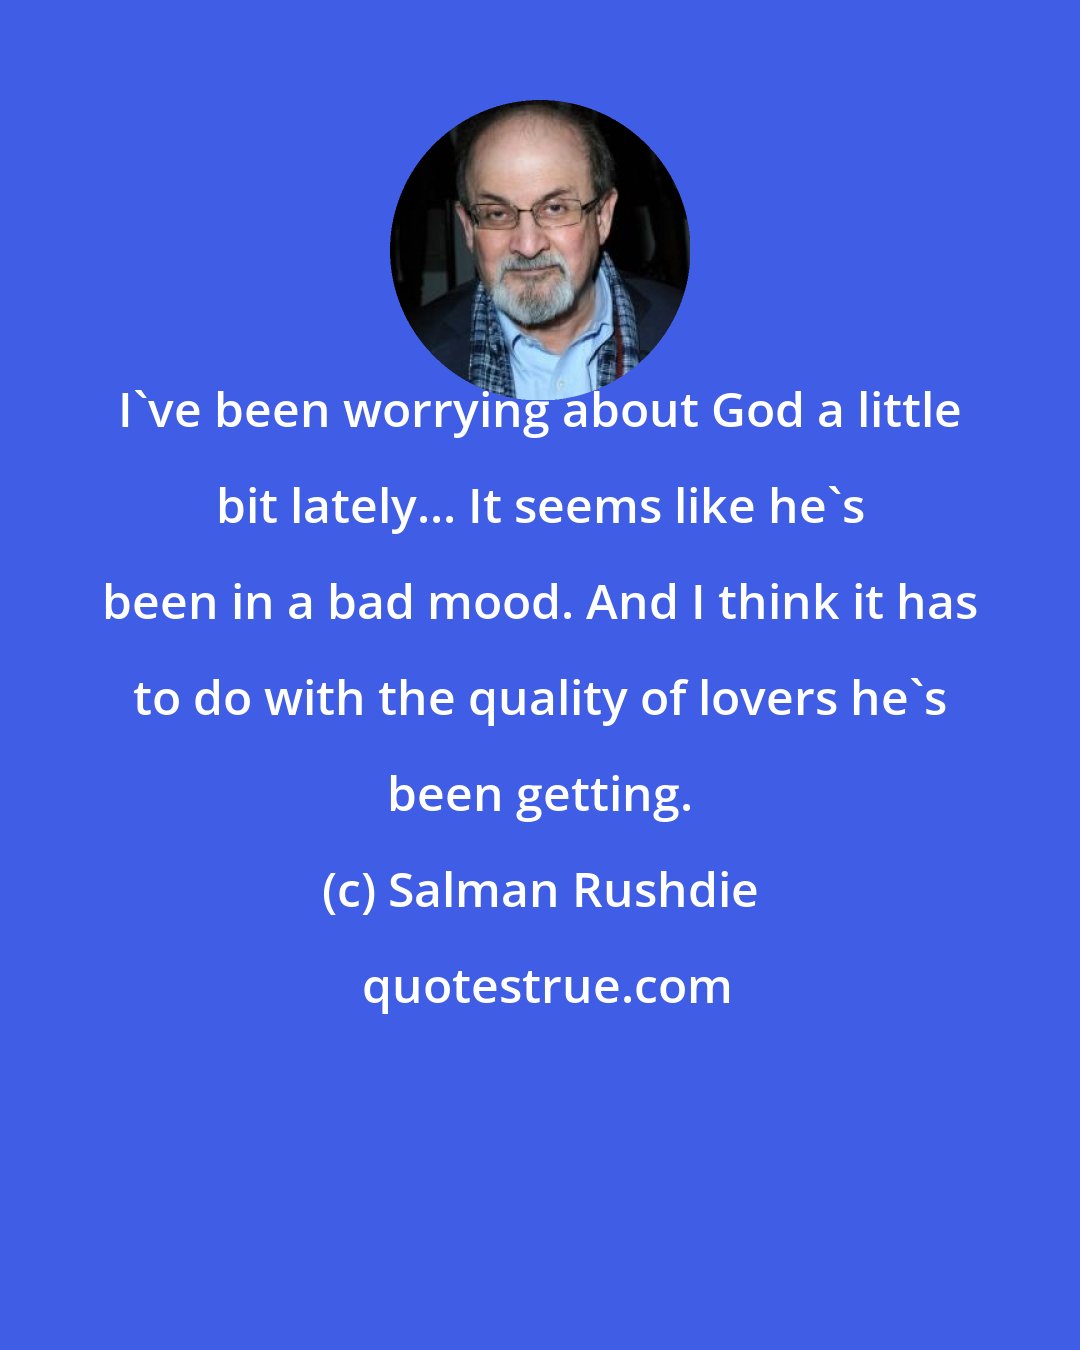 Salman Rushdie: I've been worrying about God a little bit lately... It seems like he's been in a bad mood. And I think it has to do with the quality of lovers he's been getting.